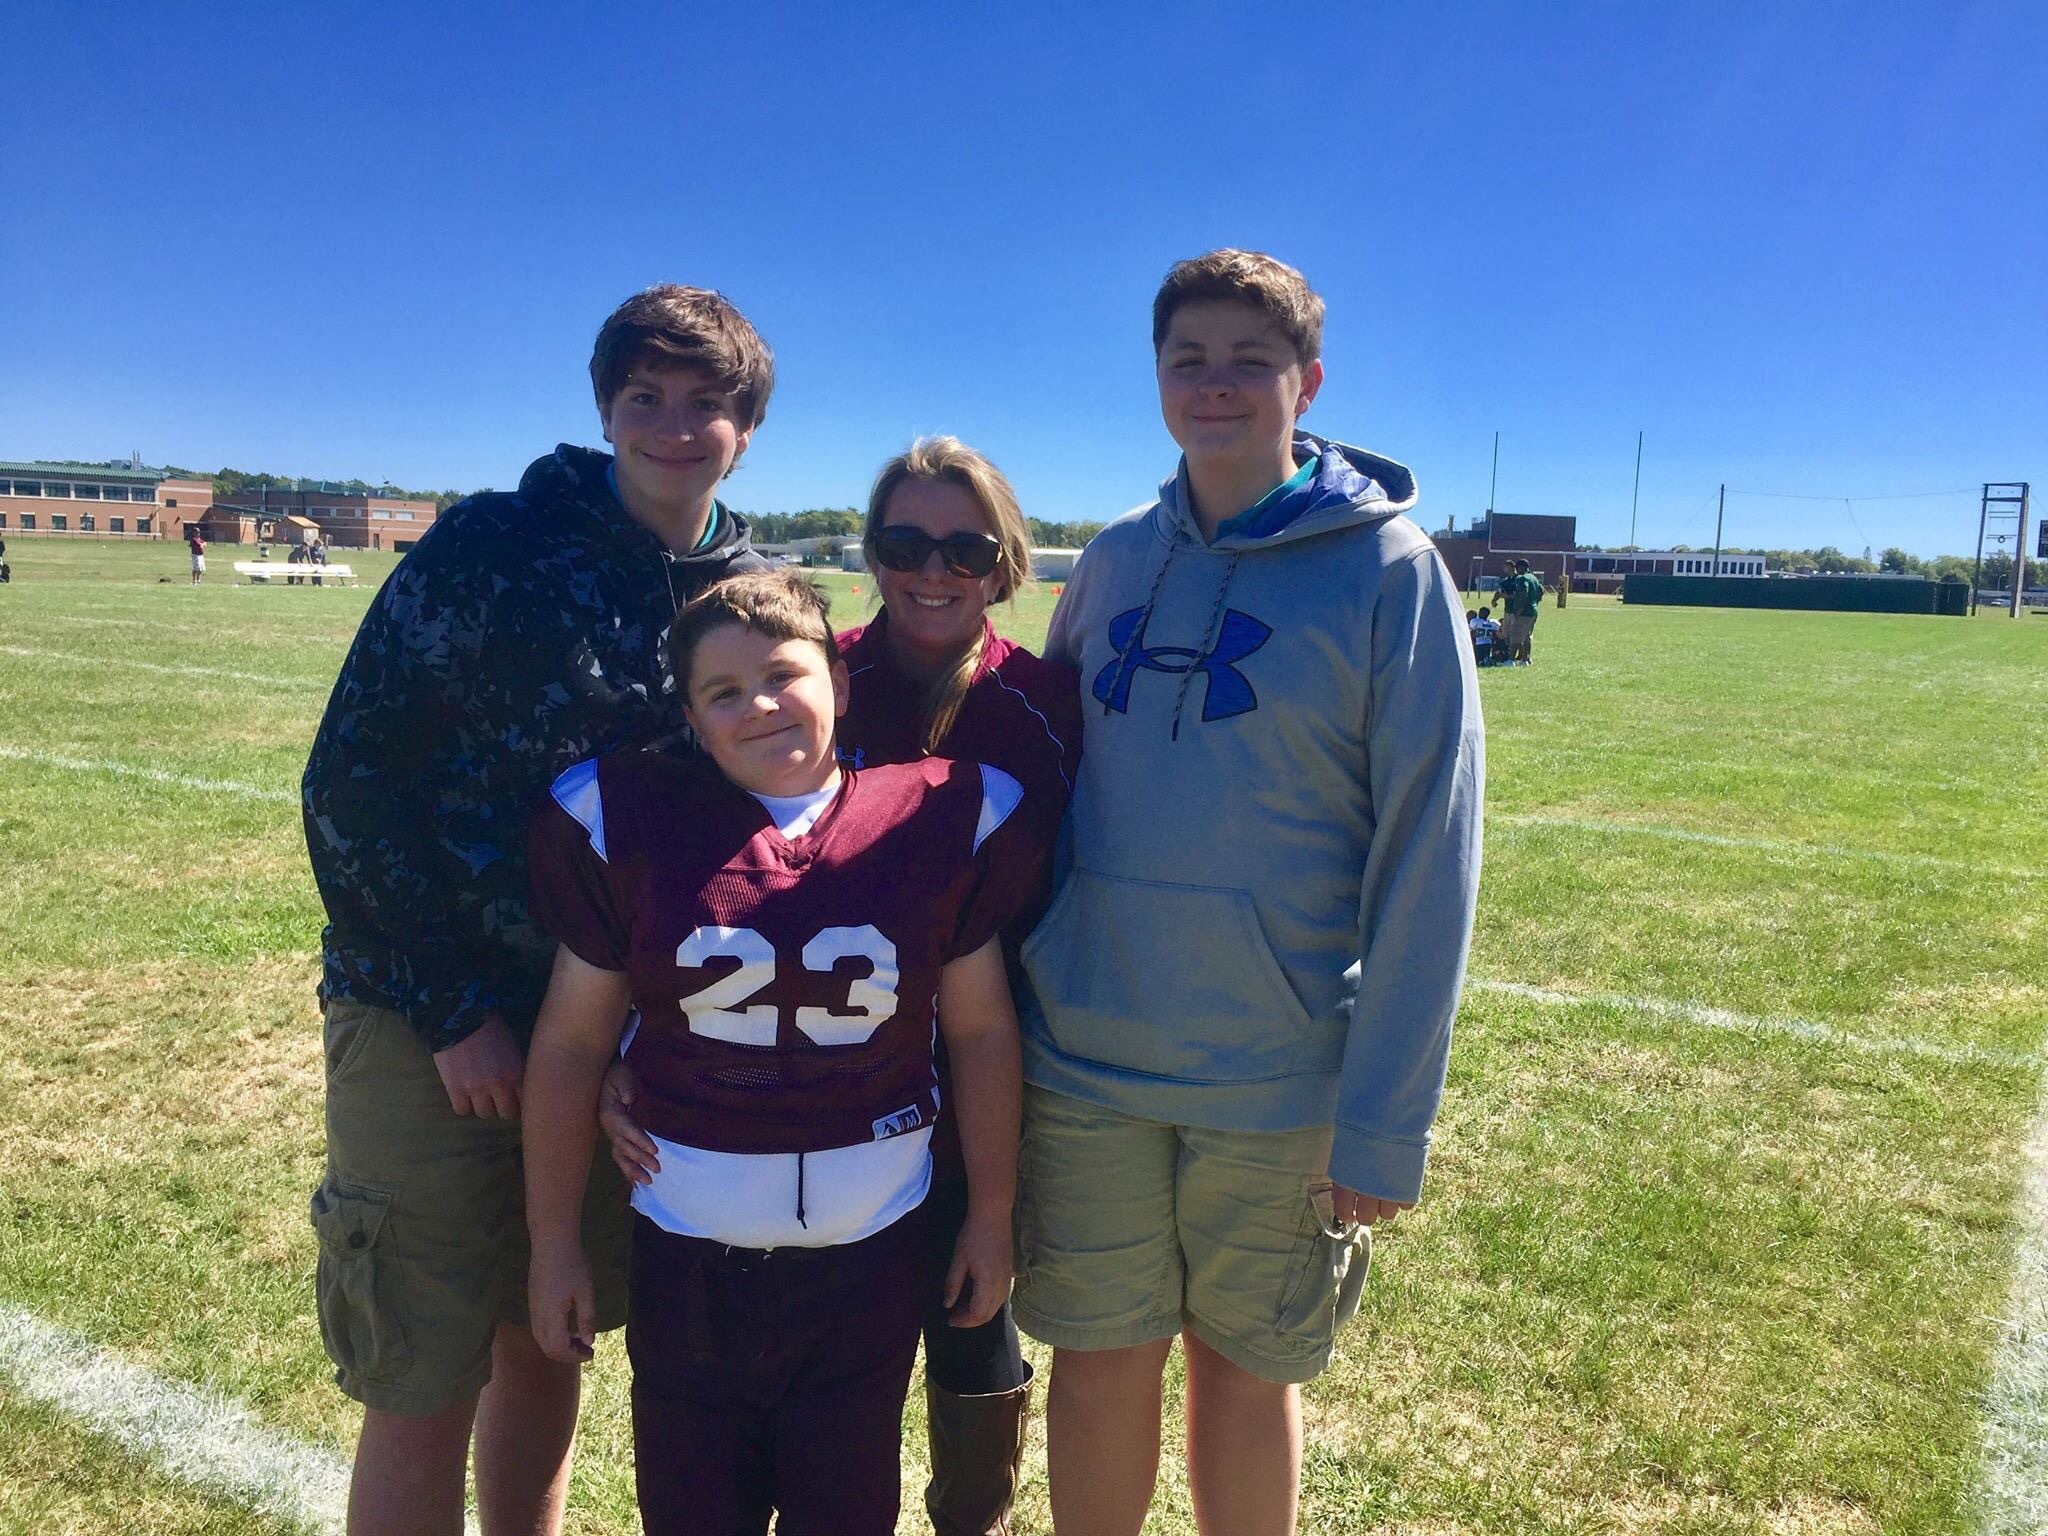 Jack Pazera, who plays on the 11-and-12-year-old Southampton PAL team, with his sister Brianna Ottati and brothers Nick and Owen.